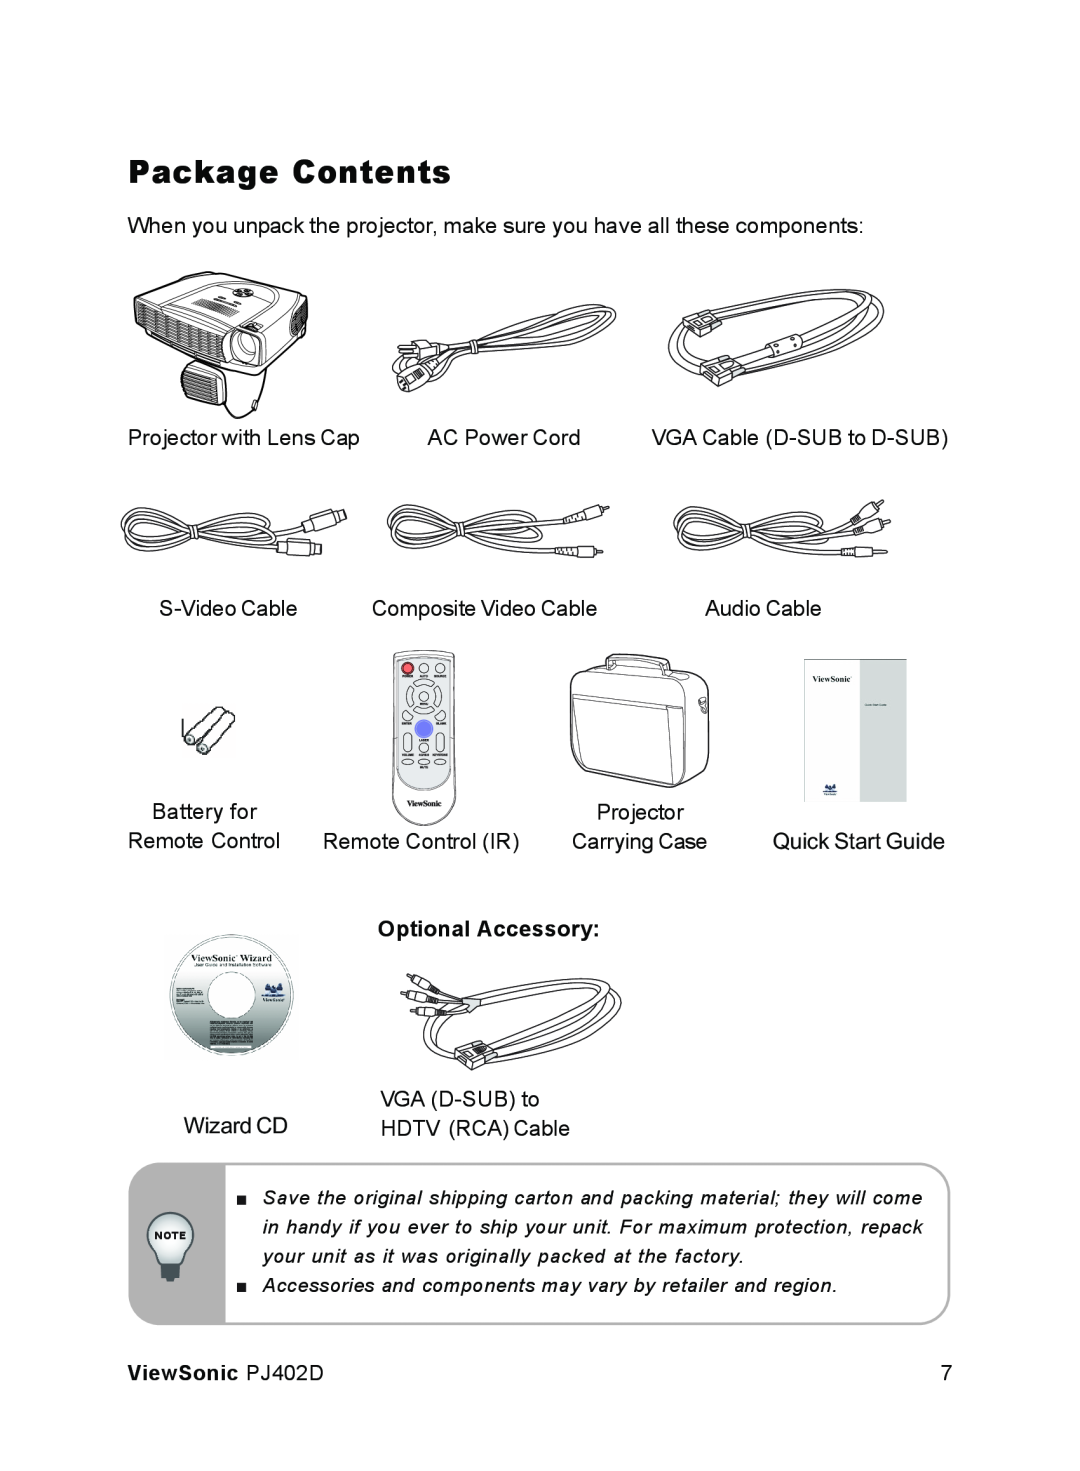 ViewSonic PJ402D manual Package Contents 